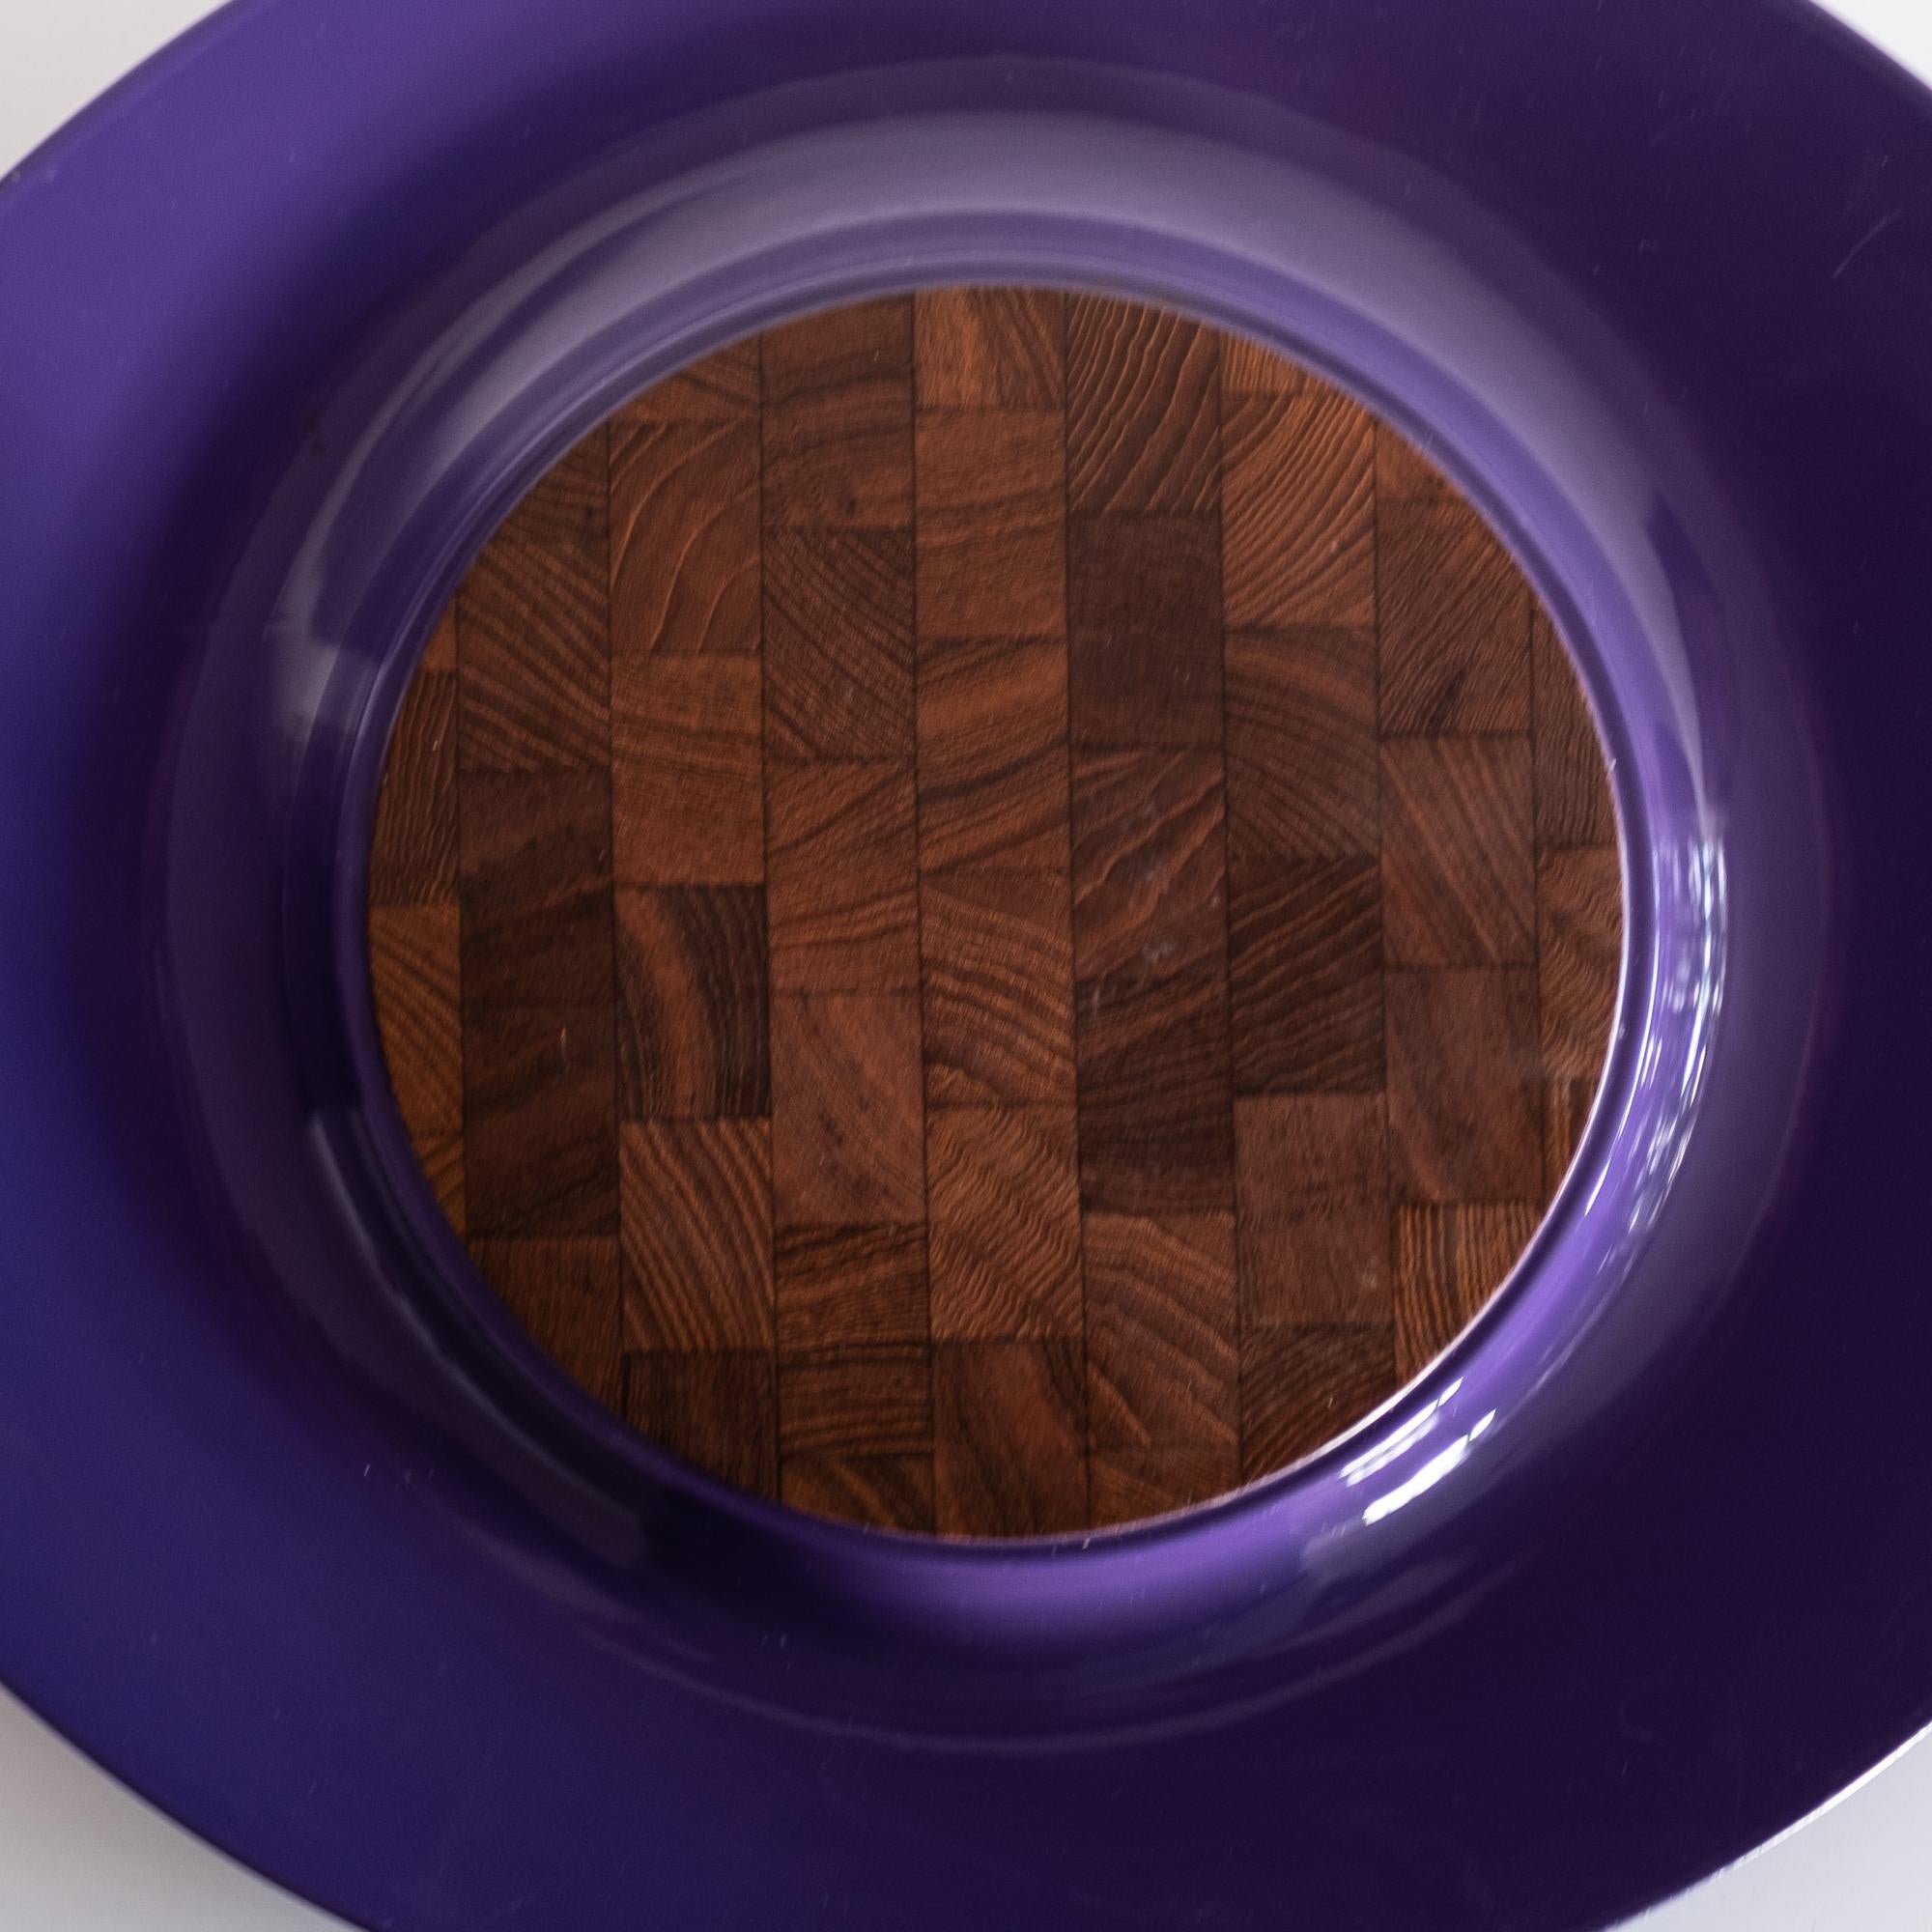 Mid-Century Modern Festivaal Tray in Purple Lacquer with Teak Insert by Jens Quistgaard for Dansk